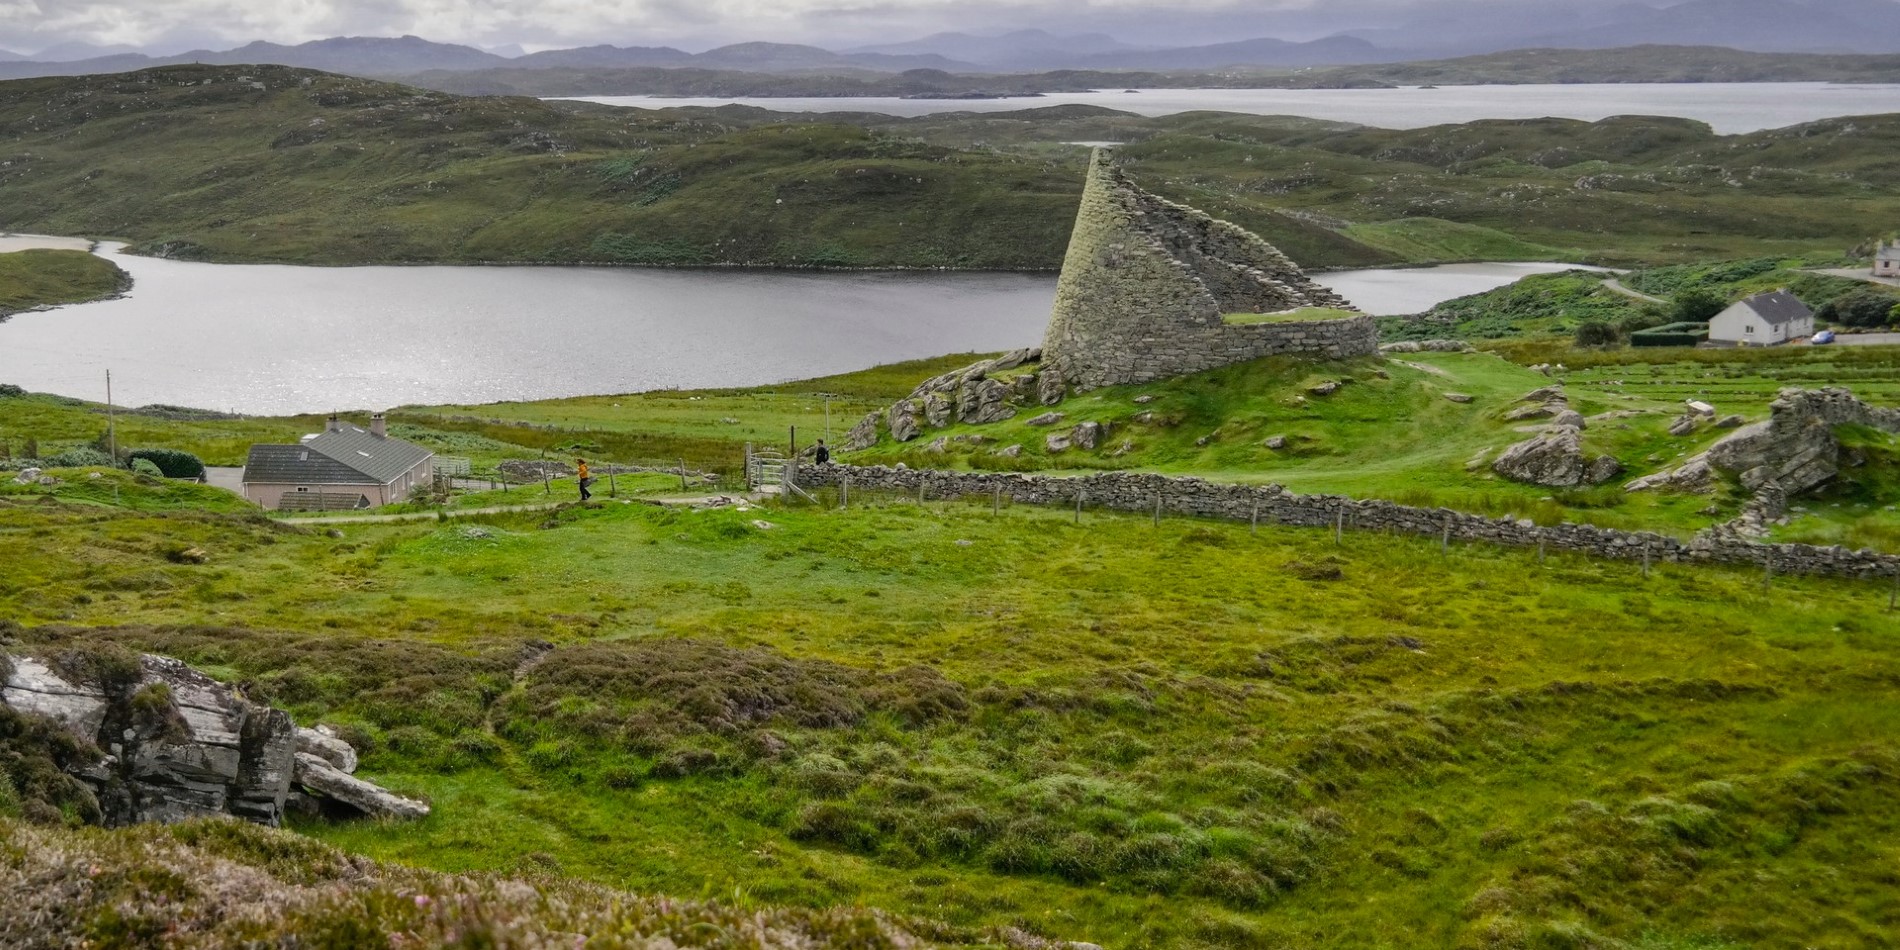 The historical site Dun Carloway Broch in Stornoway